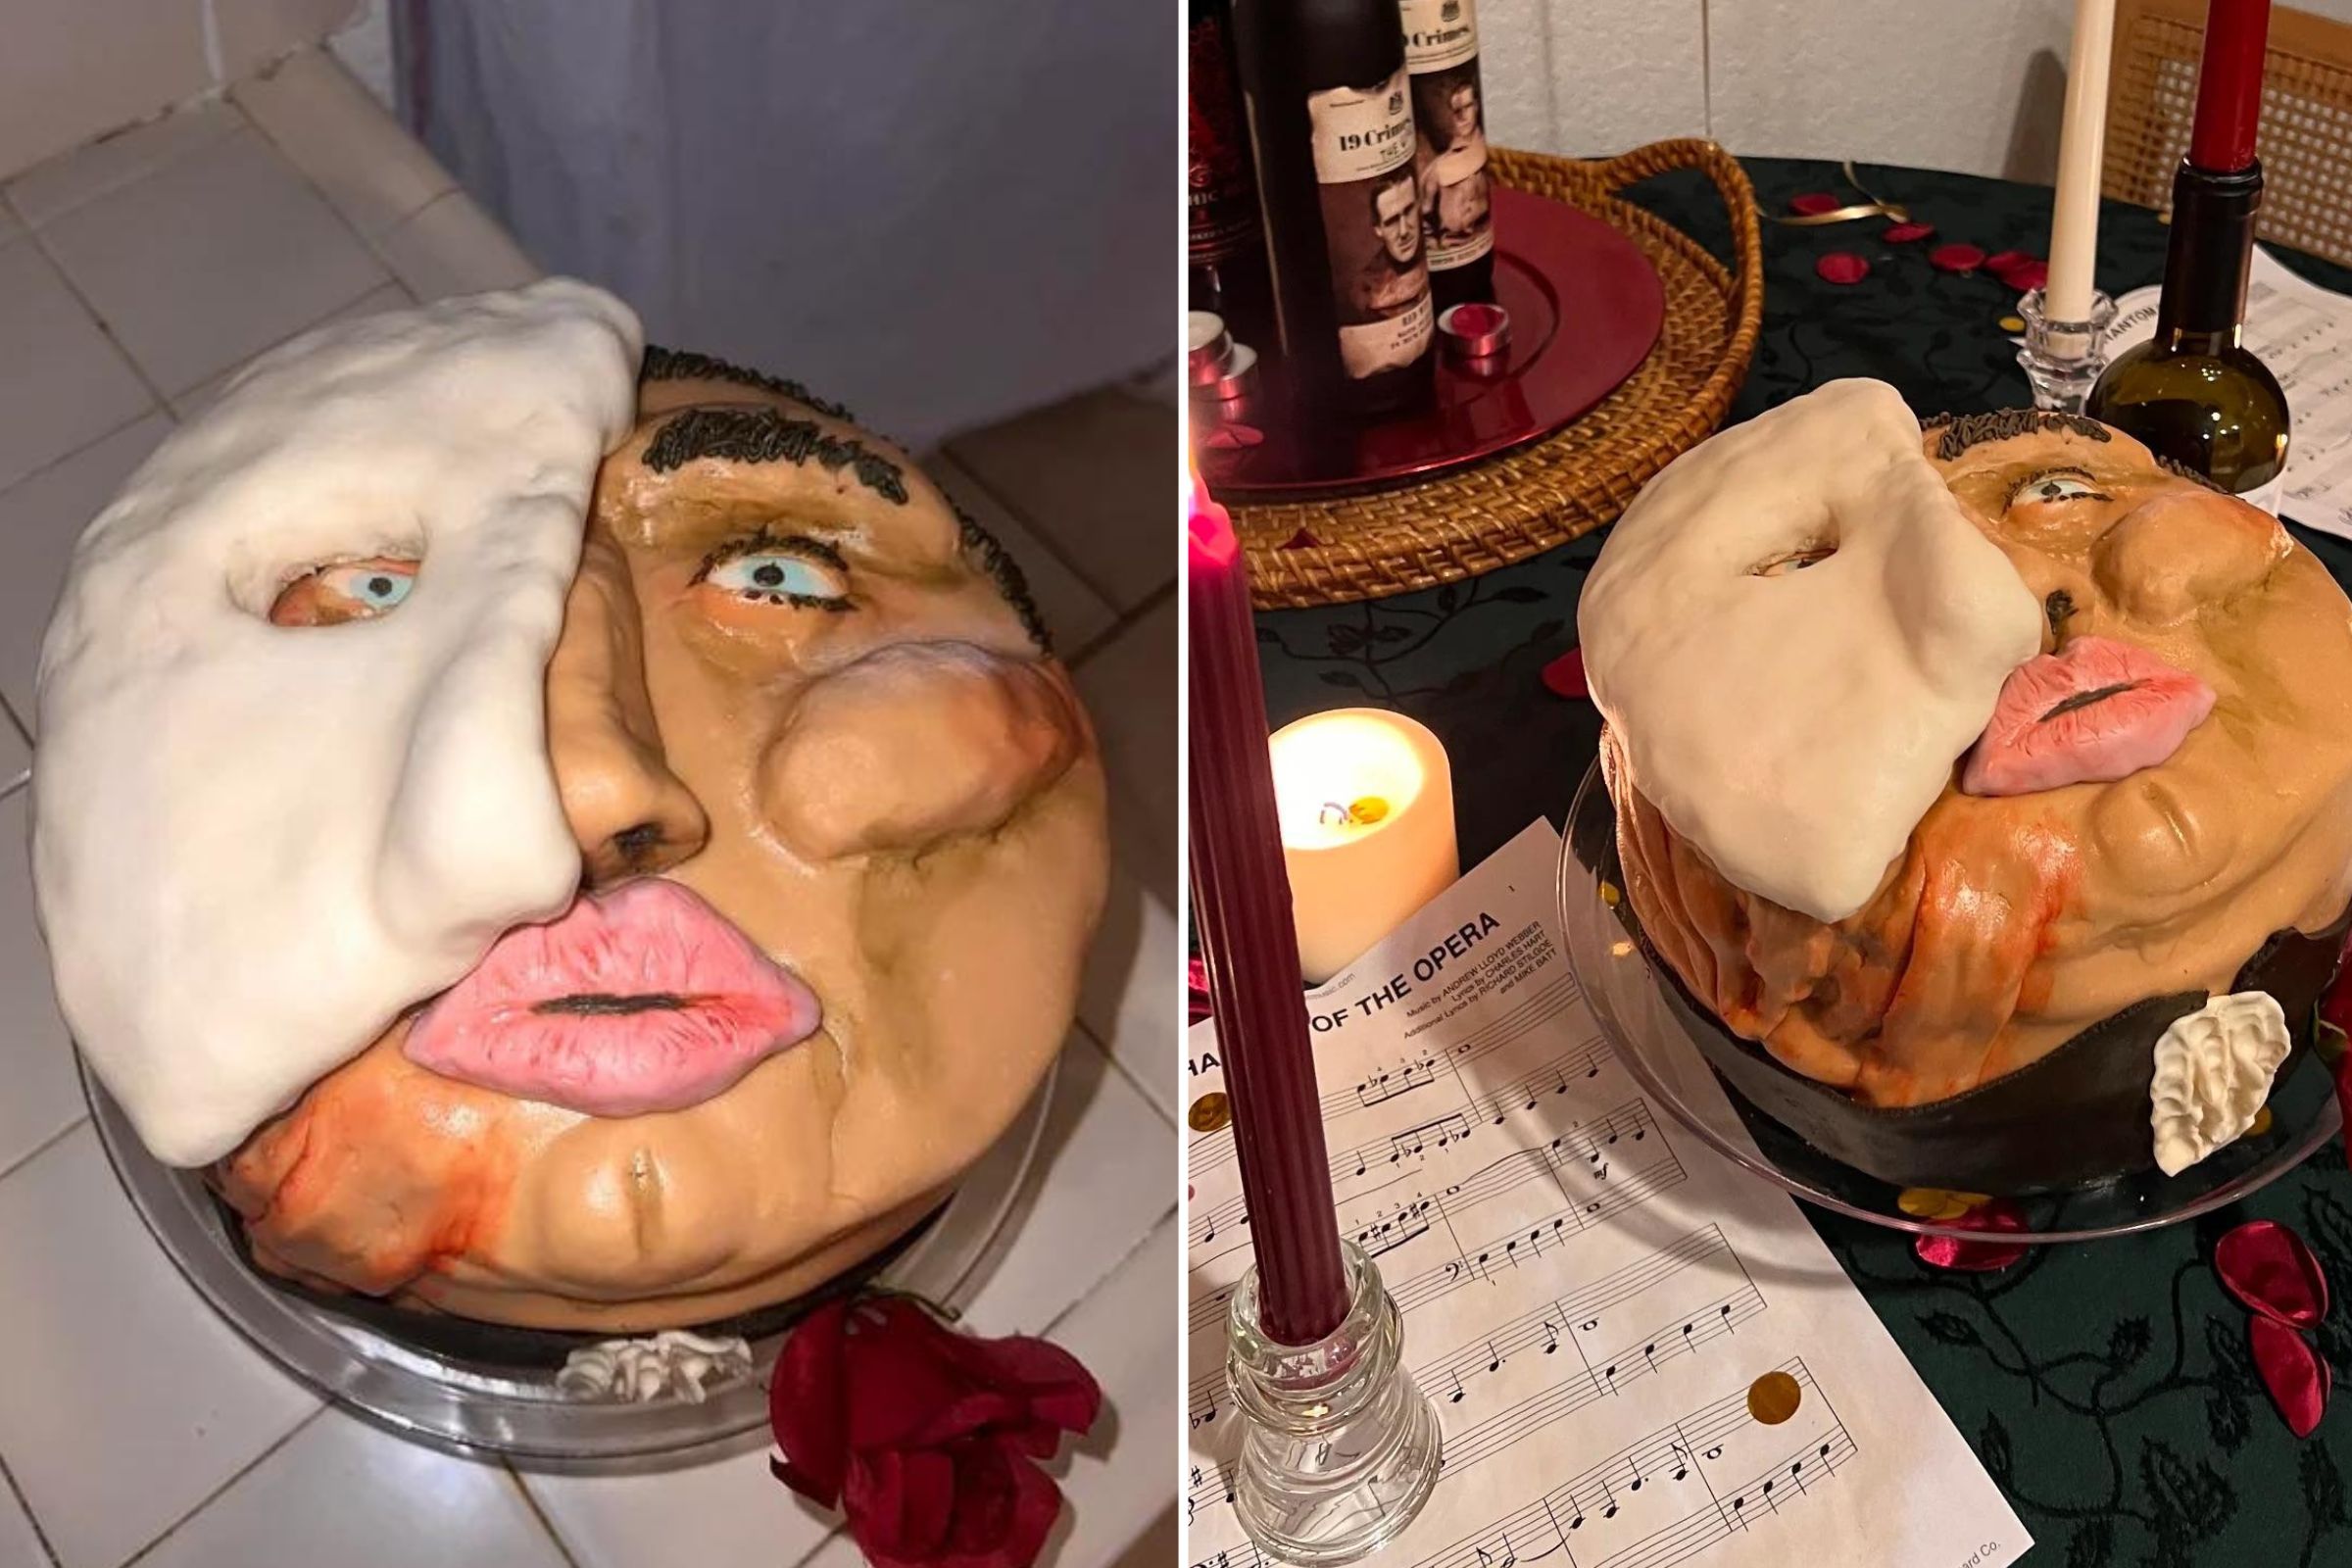 Baker's First Attempt at Theme Cake Hilariously Backfires: 'Grotesque'